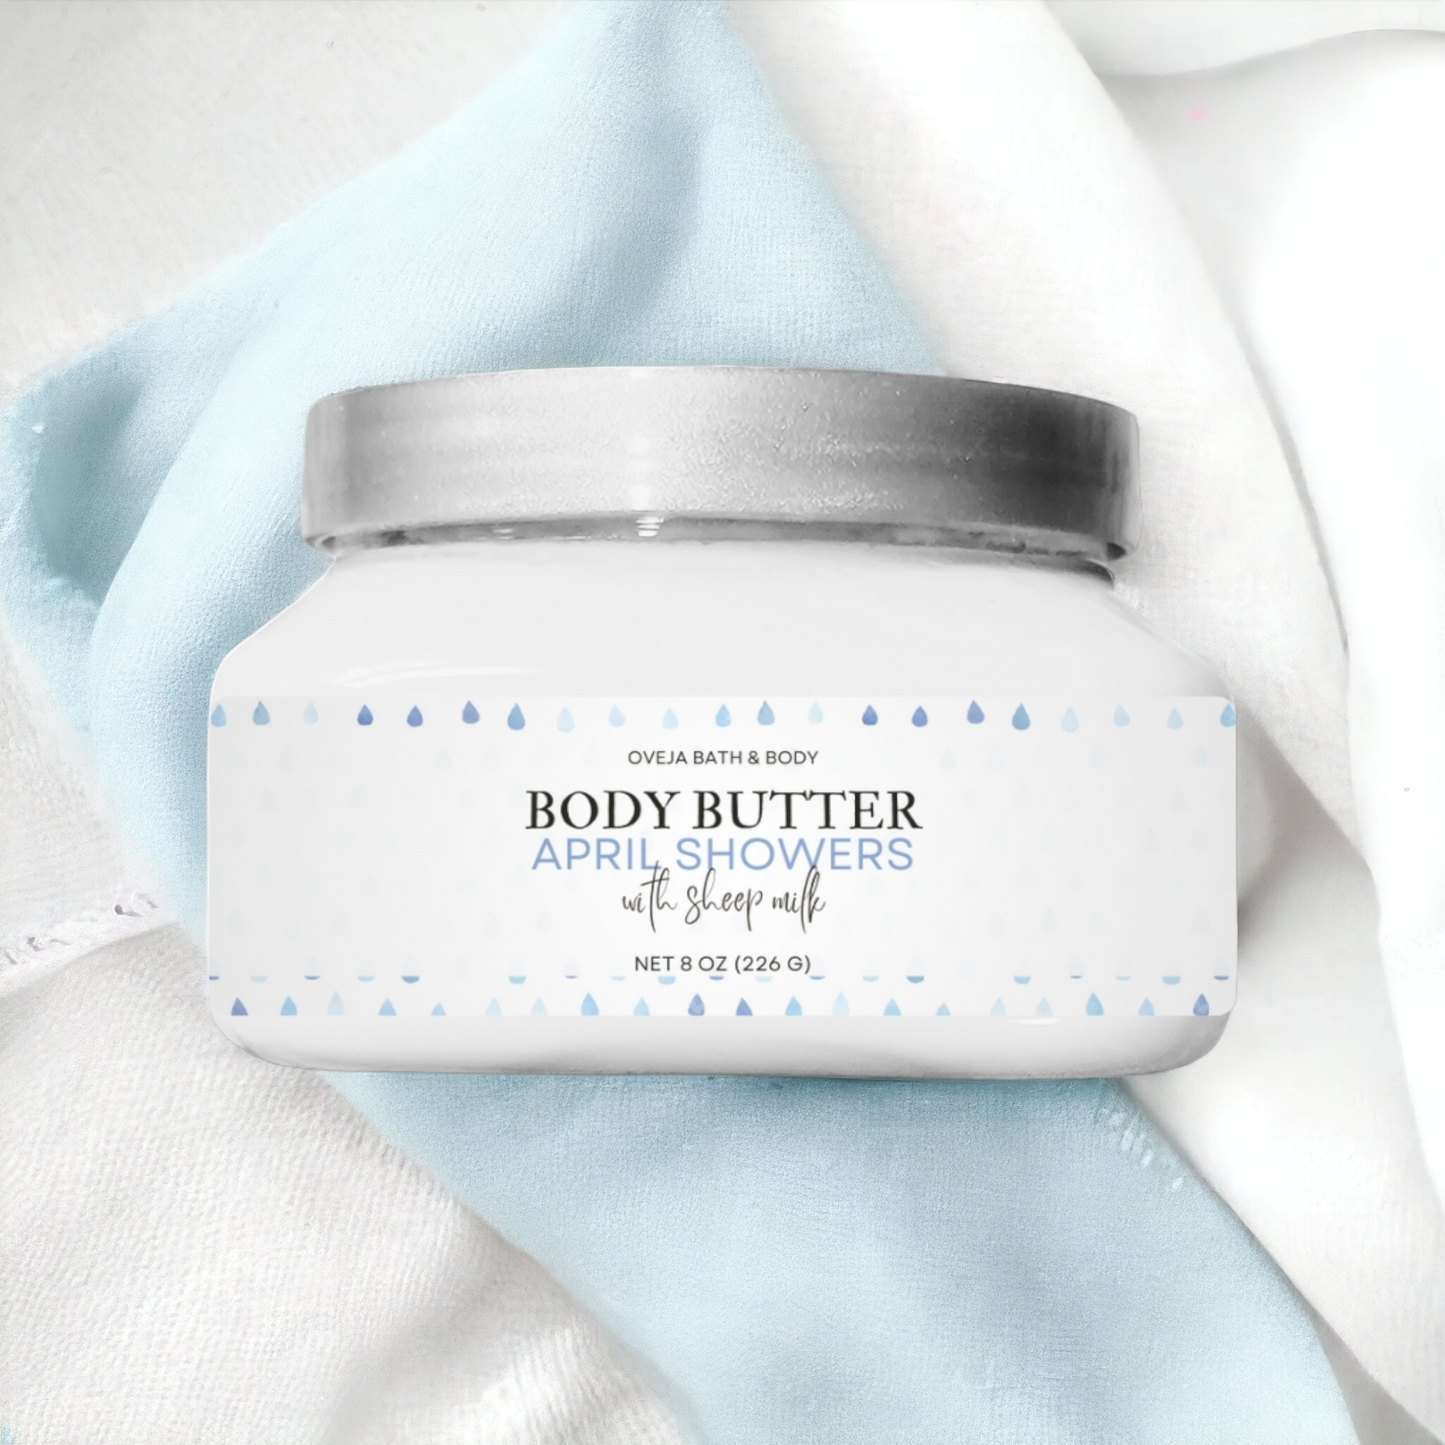 April Showers Body Butter with Sheep Milk